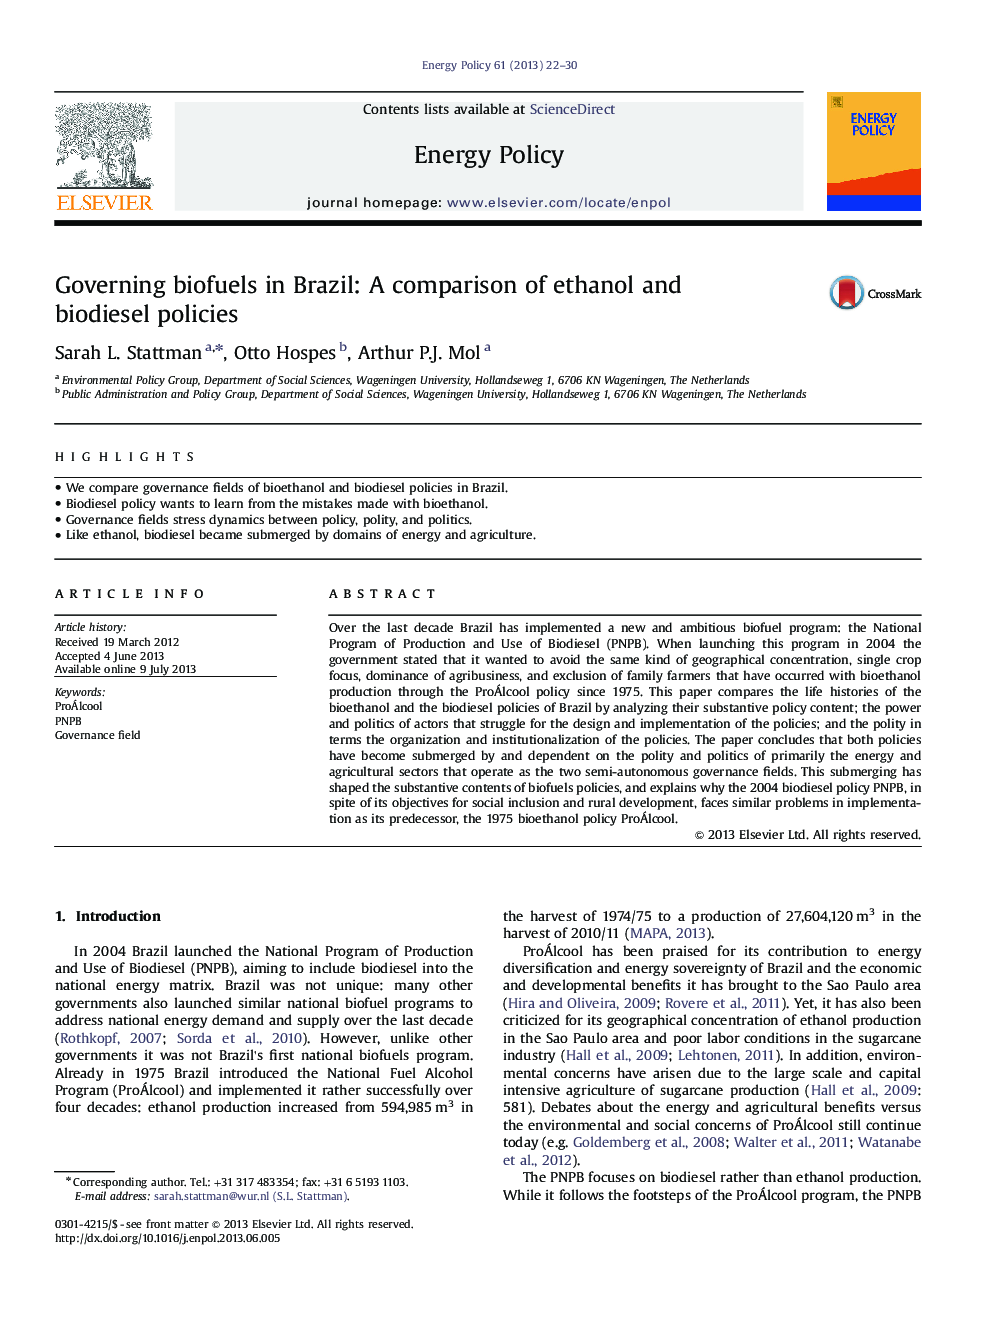 Governing biofuels in Brazil: A comparison of ethanol and biodiesel policies